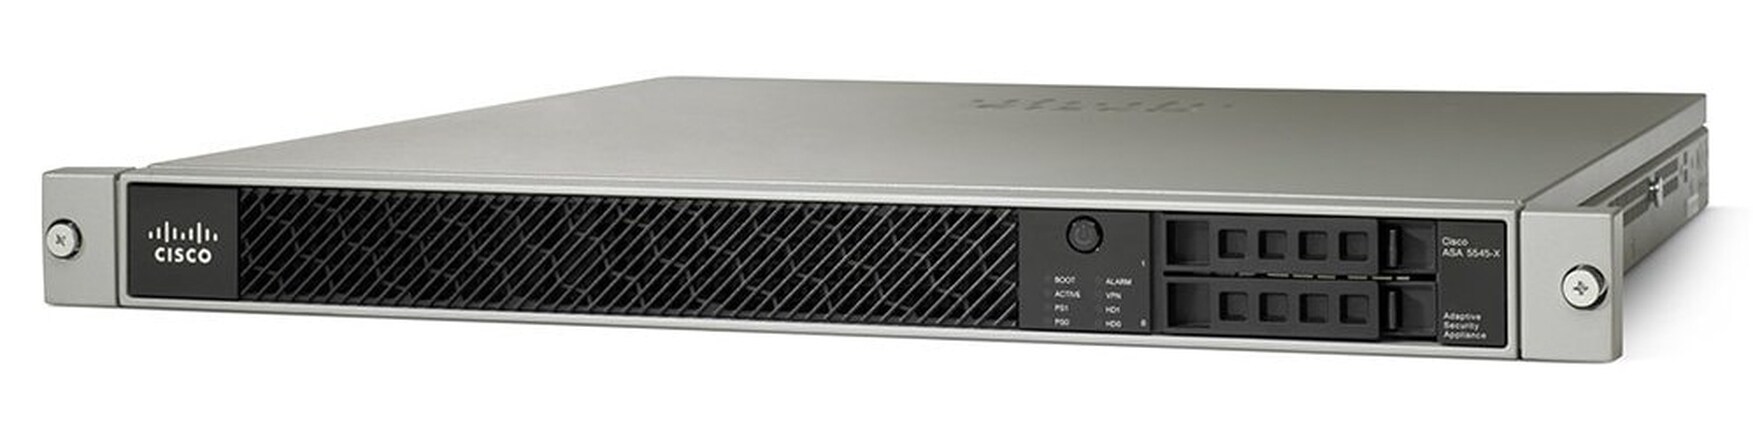 Cisco ASA 5545-X - security appliance - with FirePOWER Services